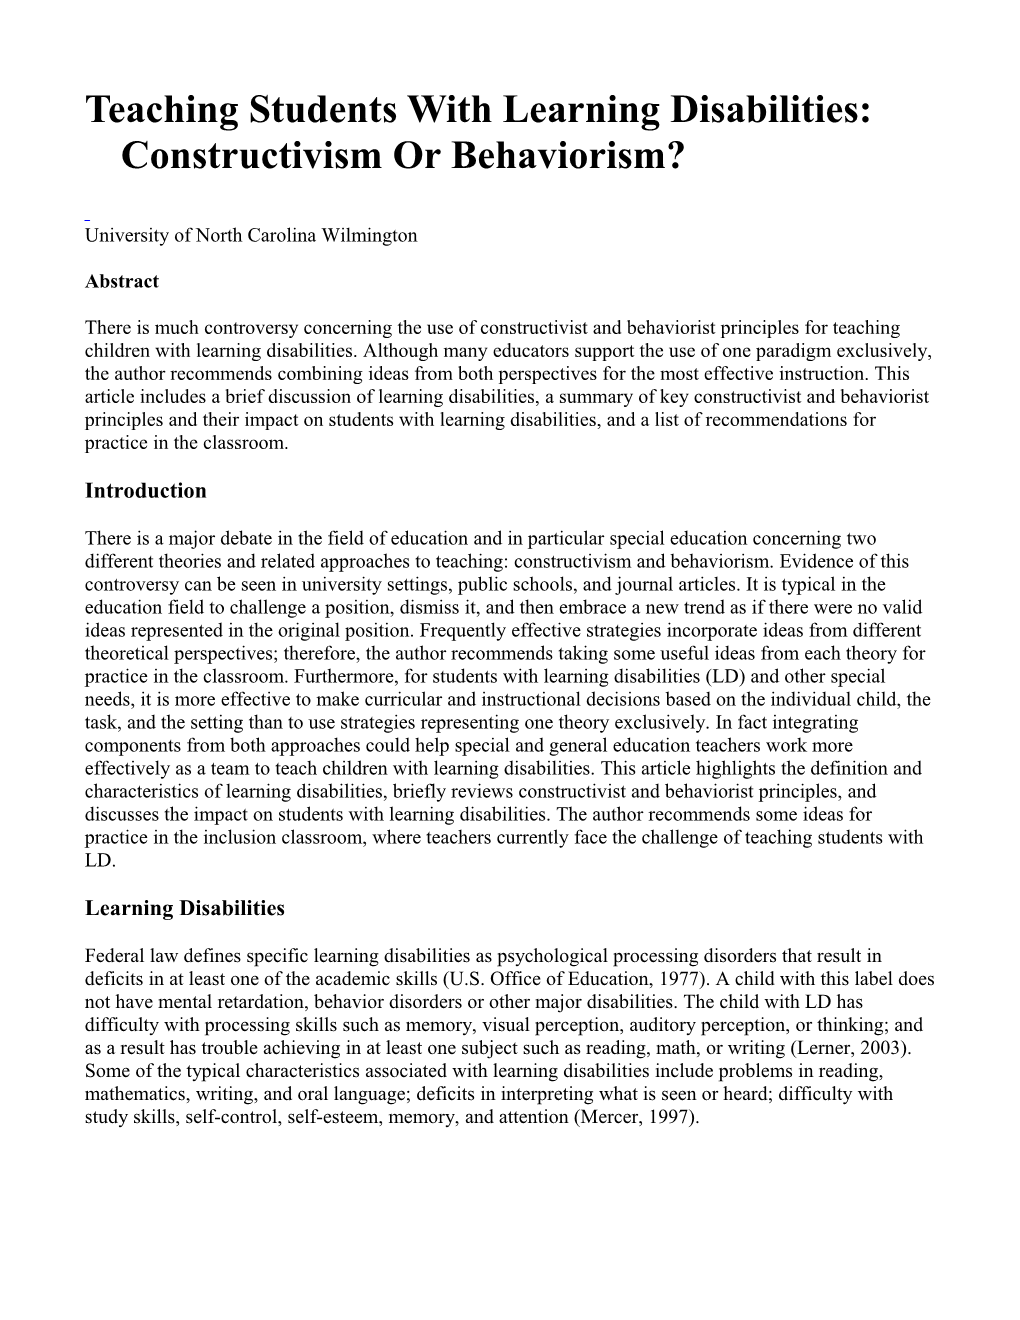 Teaching Students with Learning Disabilities: Constructivism Or Behaviorism